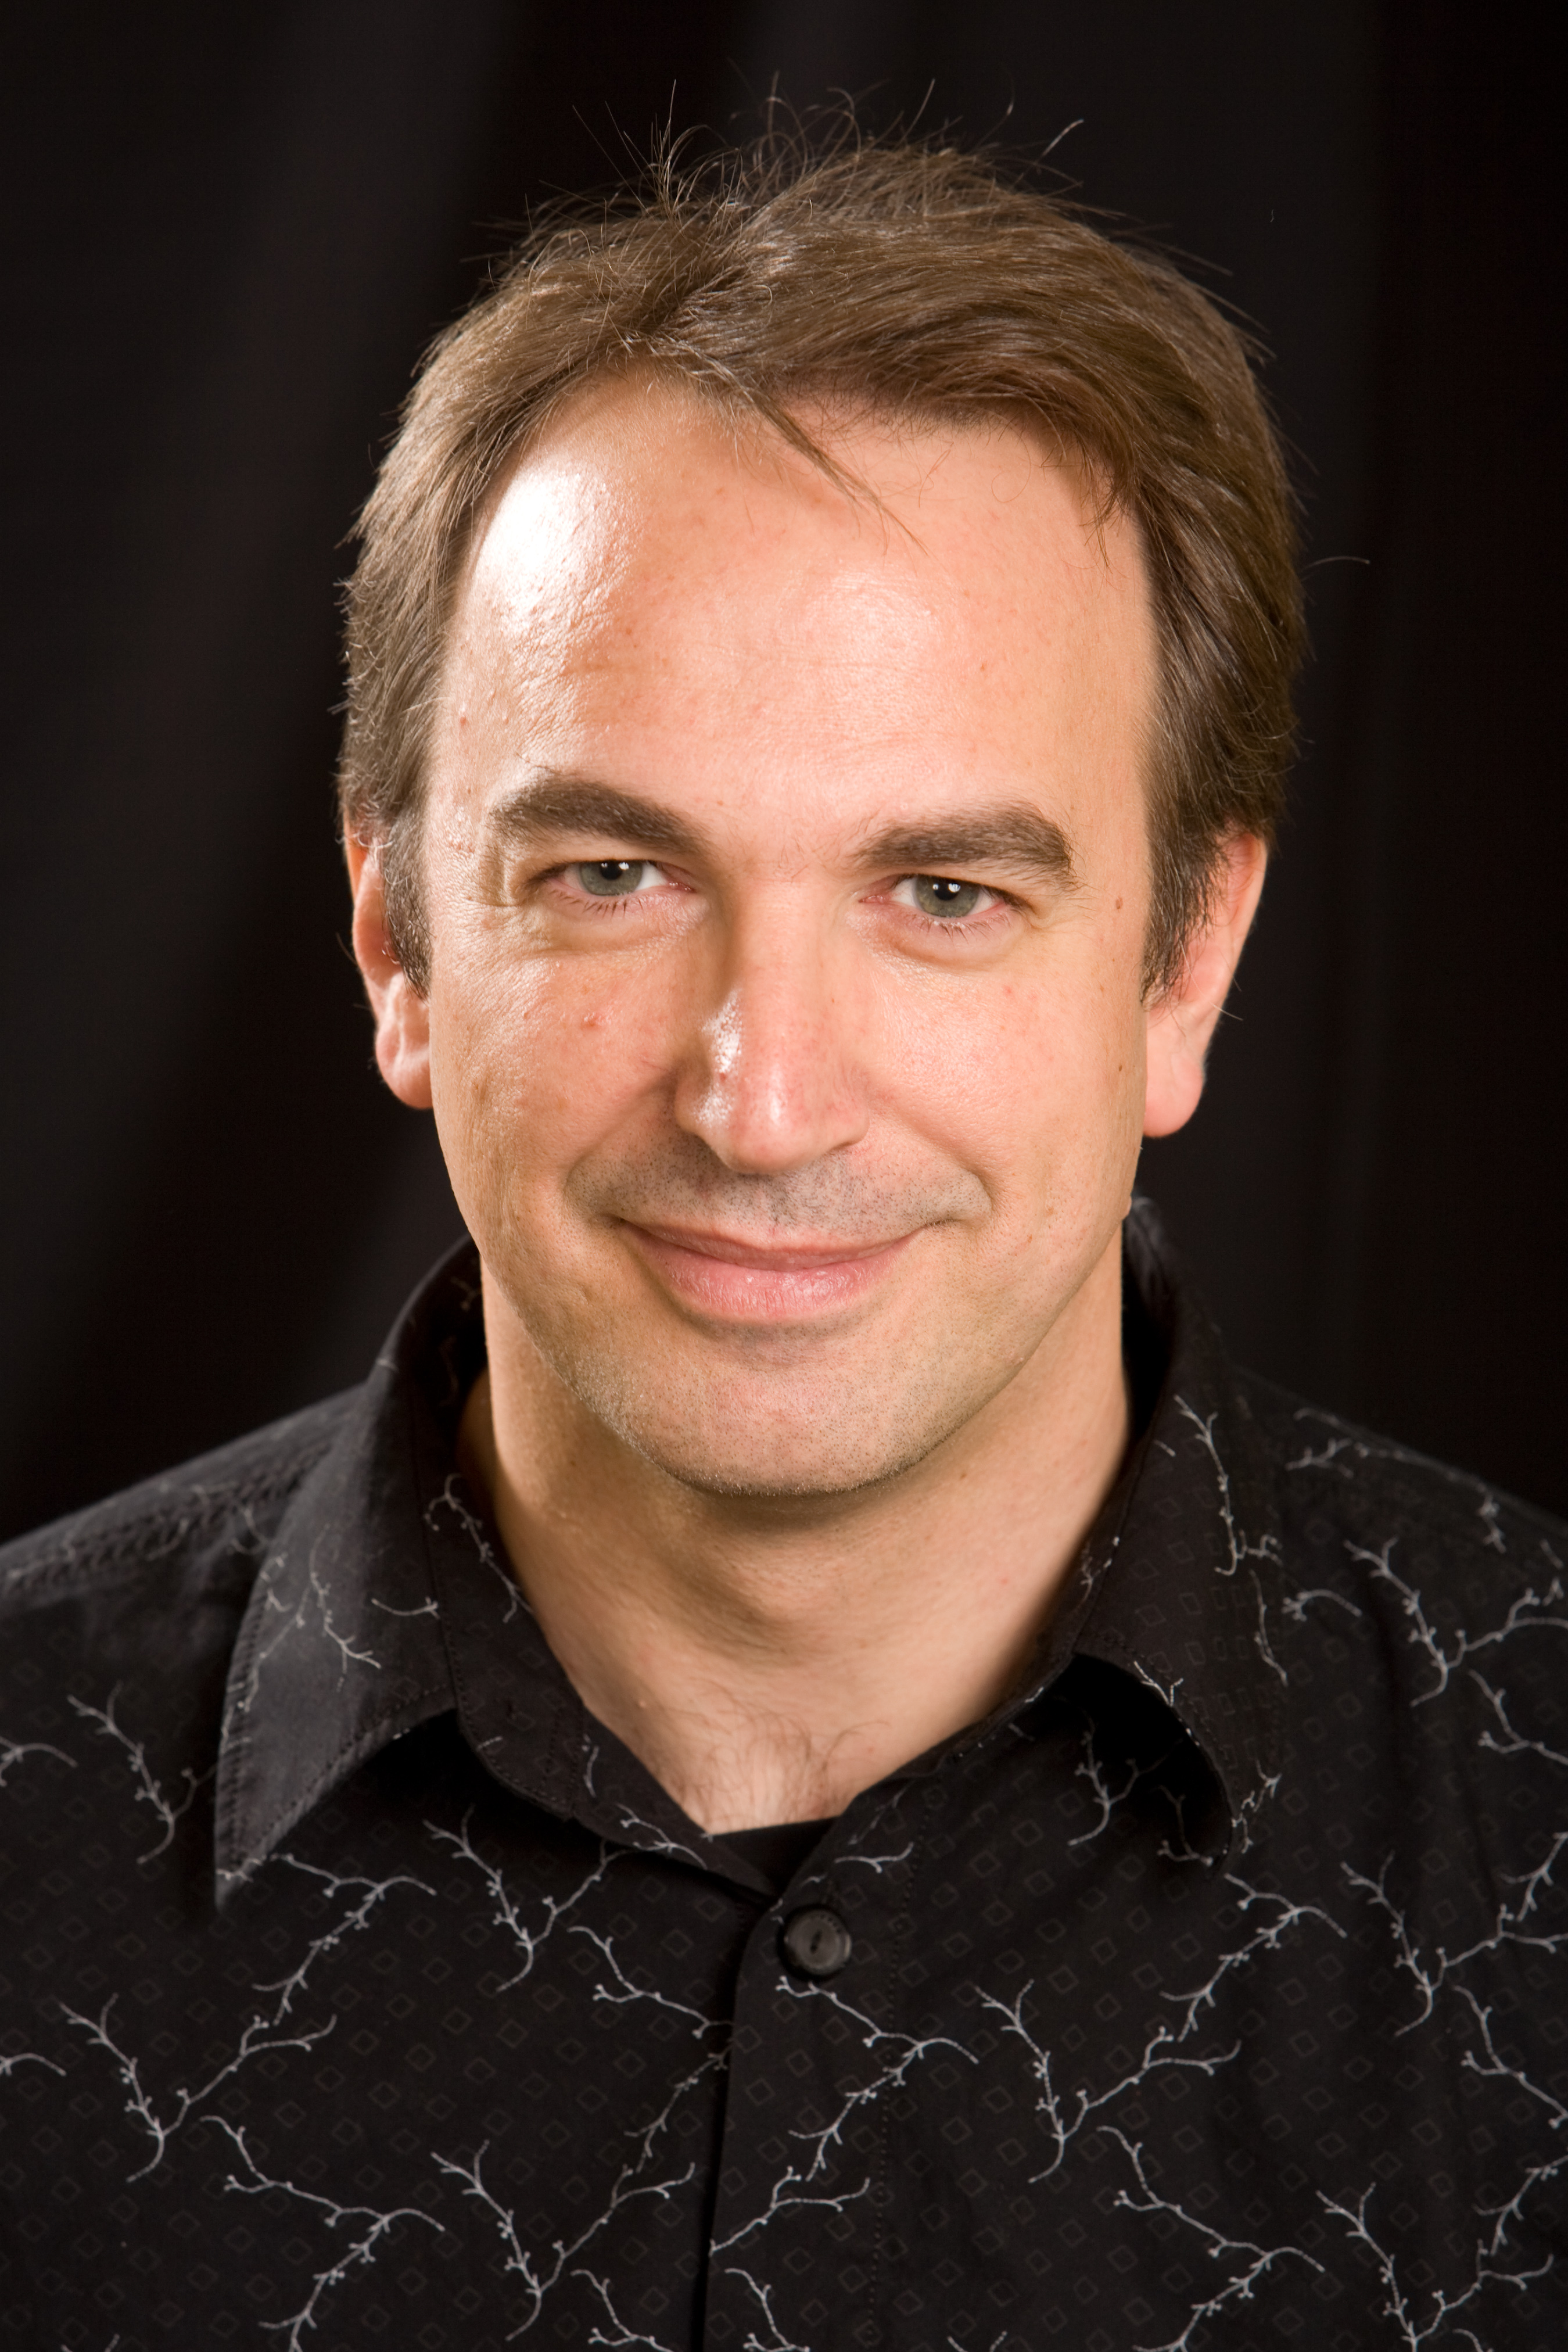 headshot of white man with brown hair wearing a black shirt smirking in front of a black background